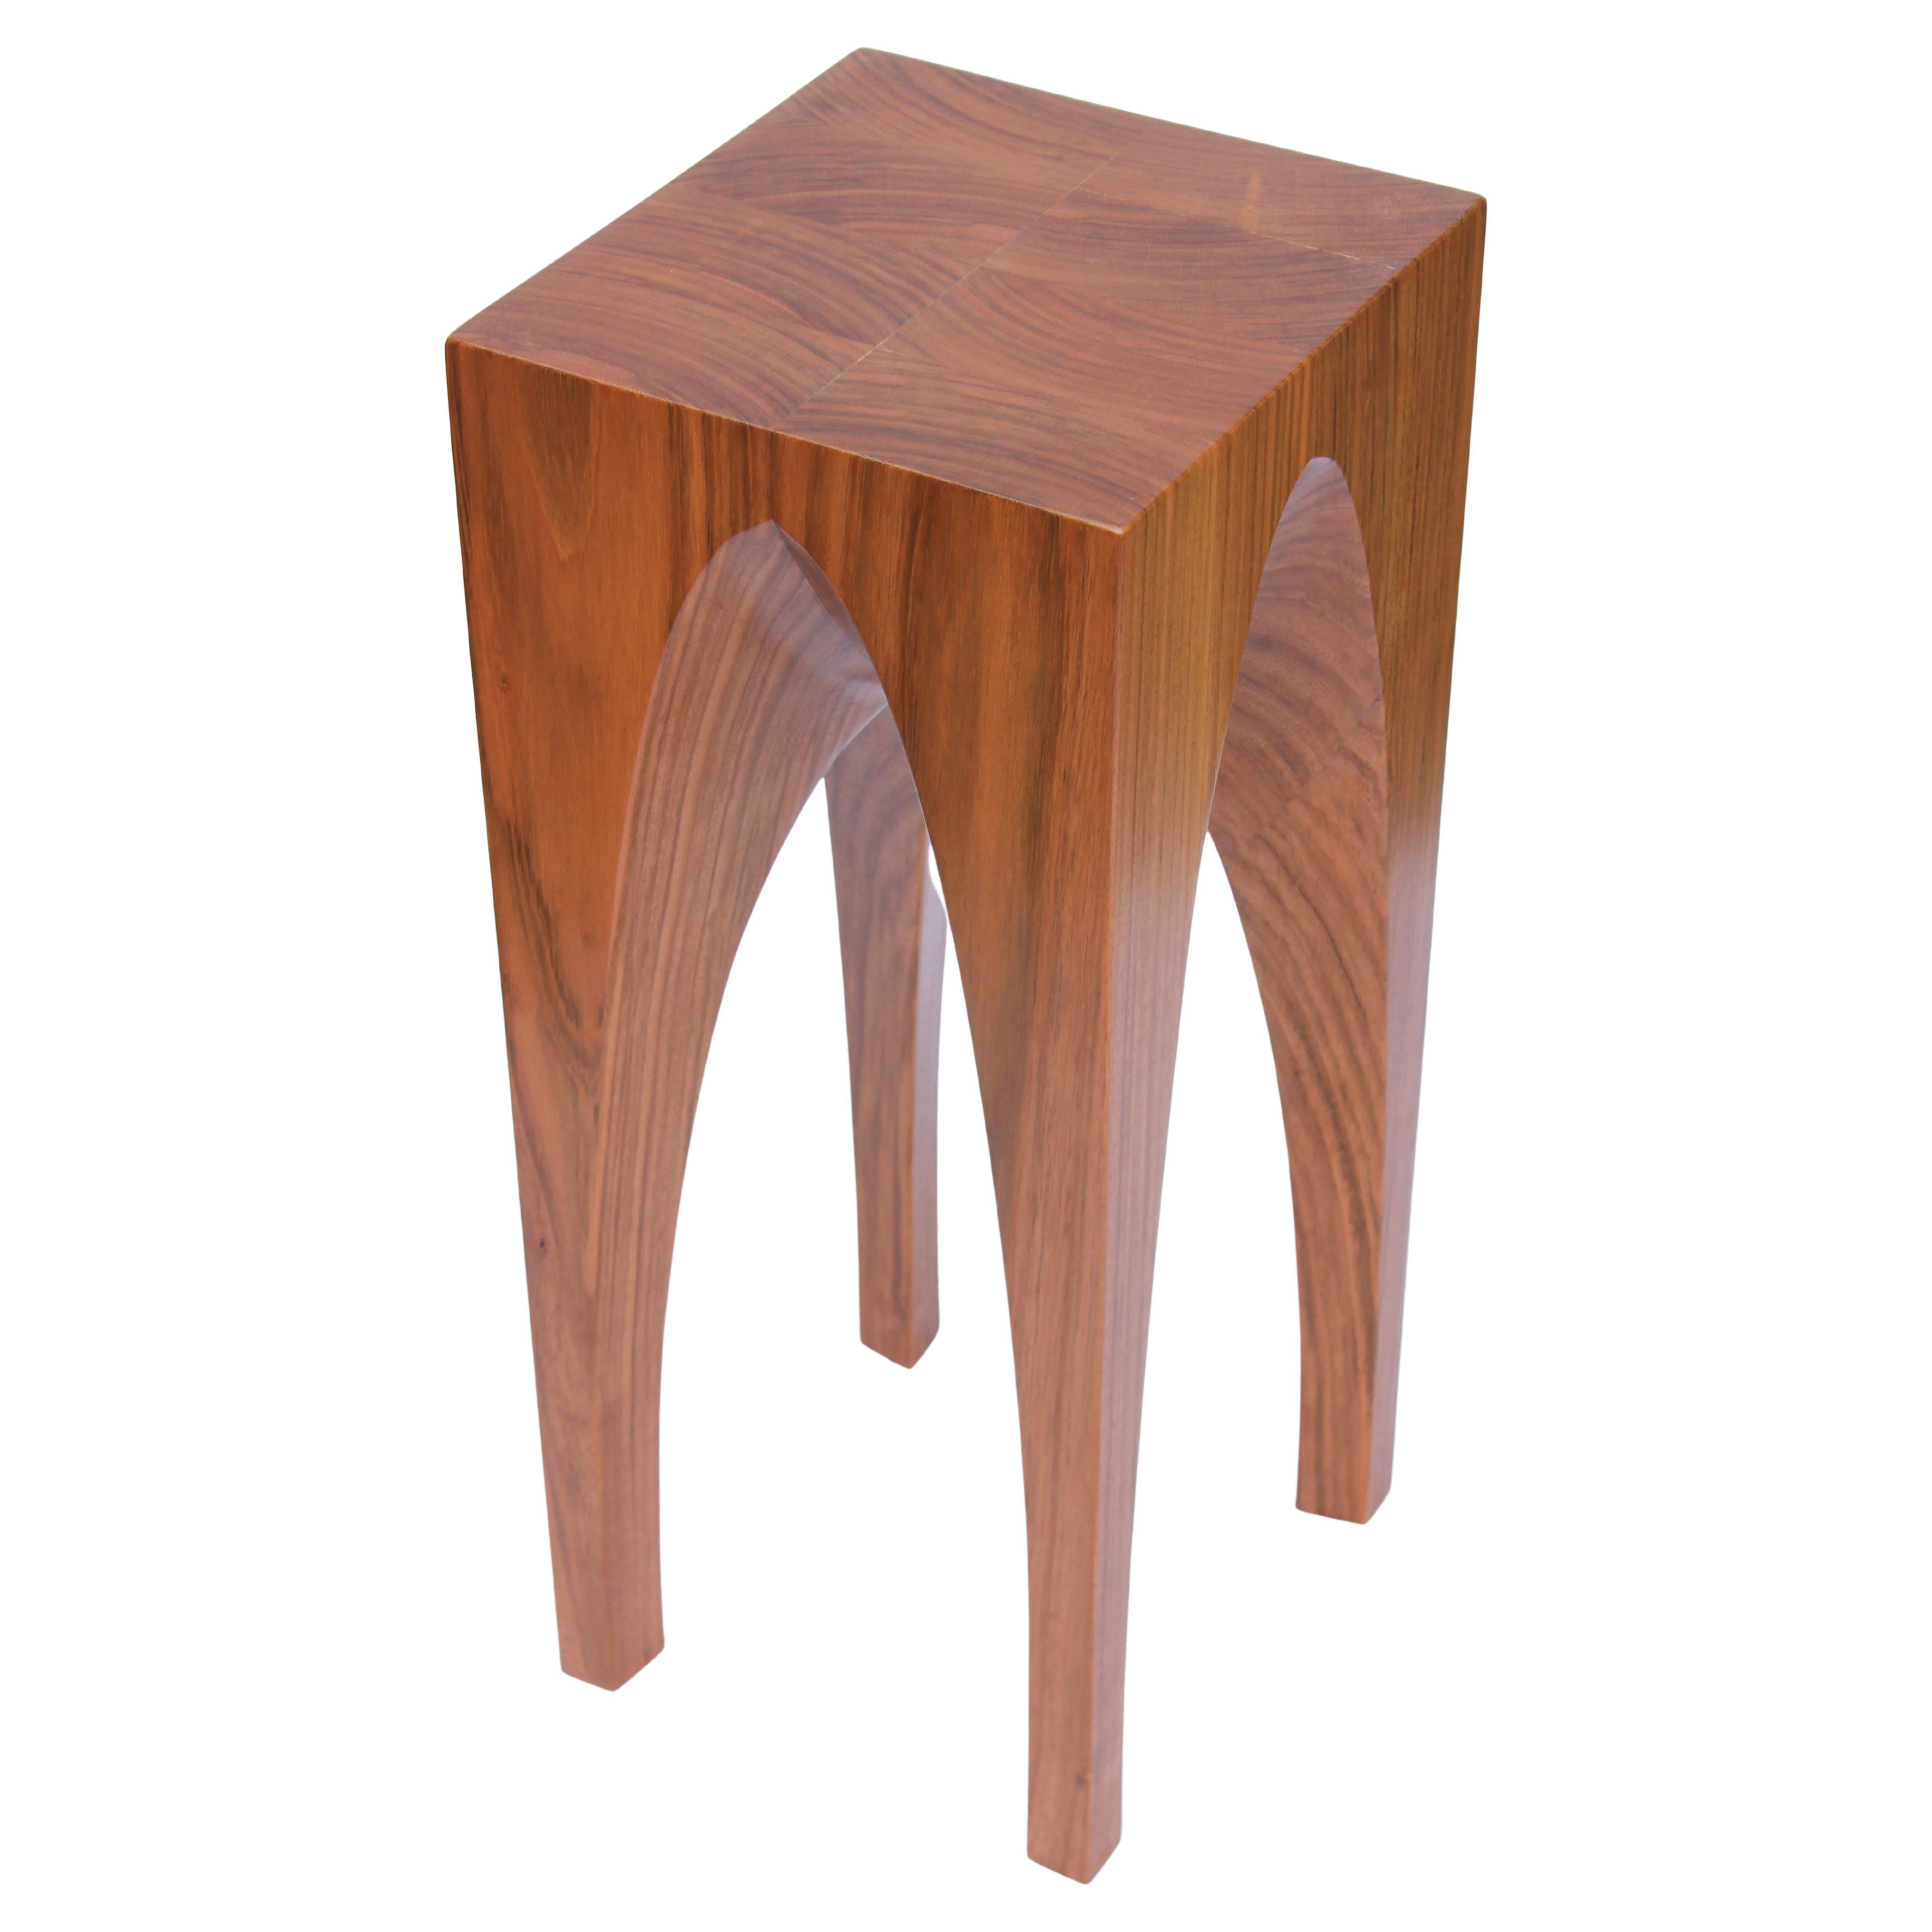 Arch Side Table - Catenary Arch (Jatobá wood) For Sale